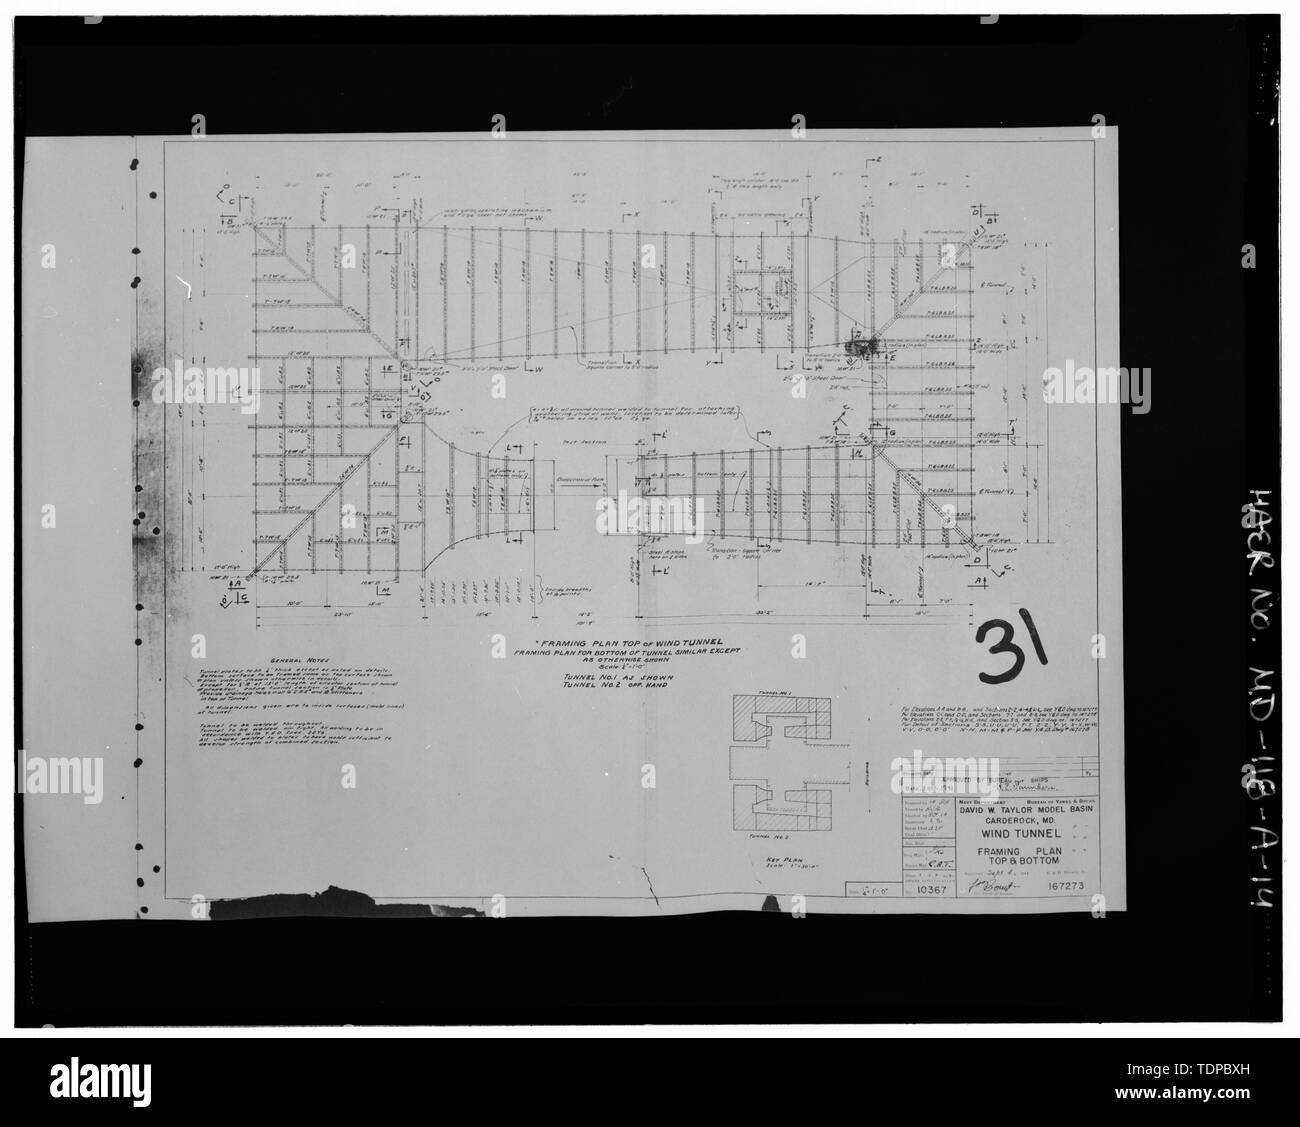 Photocopy of drawing (original in possession of Naval Surface Warfare Center Carderock Division, Bethesda, MD) WIND TUNNEL, FRAMING PLAN, TOP AND BOTTOM, 1941 - Naval Surface Warfare Center, Subsonic Wind Tunnel Building, Bounded by Clara Barton Parkway and McArthur Boulevard, Silver Spring, Montgomery County, MD; U.S. Department of the Navy; R. Christopher Goodwin and Associates, Incorporated, contractor; Melhuish, Geoffrey Eden, project manager; Wise, Harriet, photographer Stock Photo